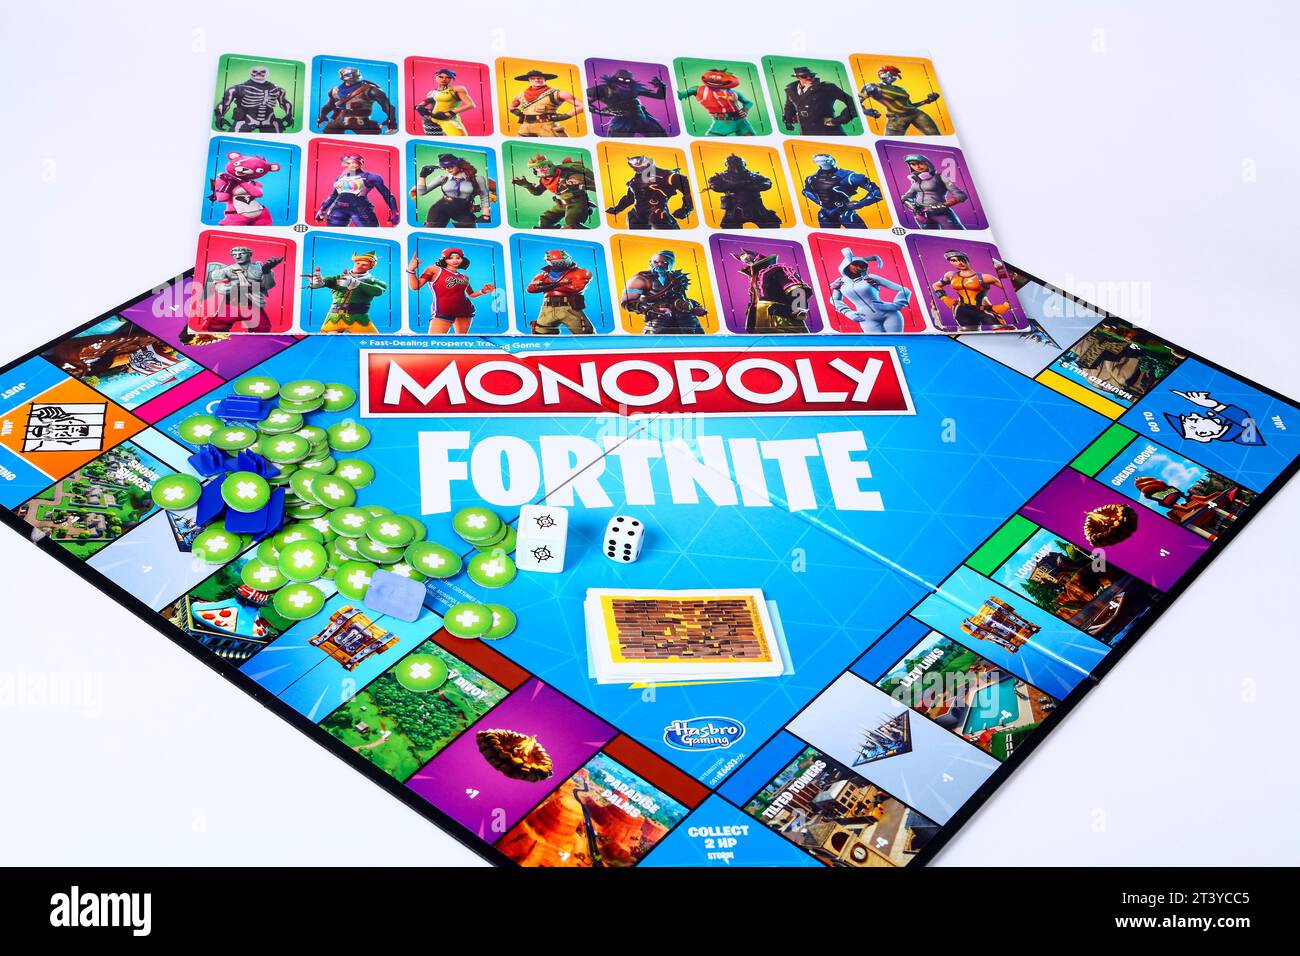 Monopoly Fortnite collectors edition of the popular board game Stock Photo